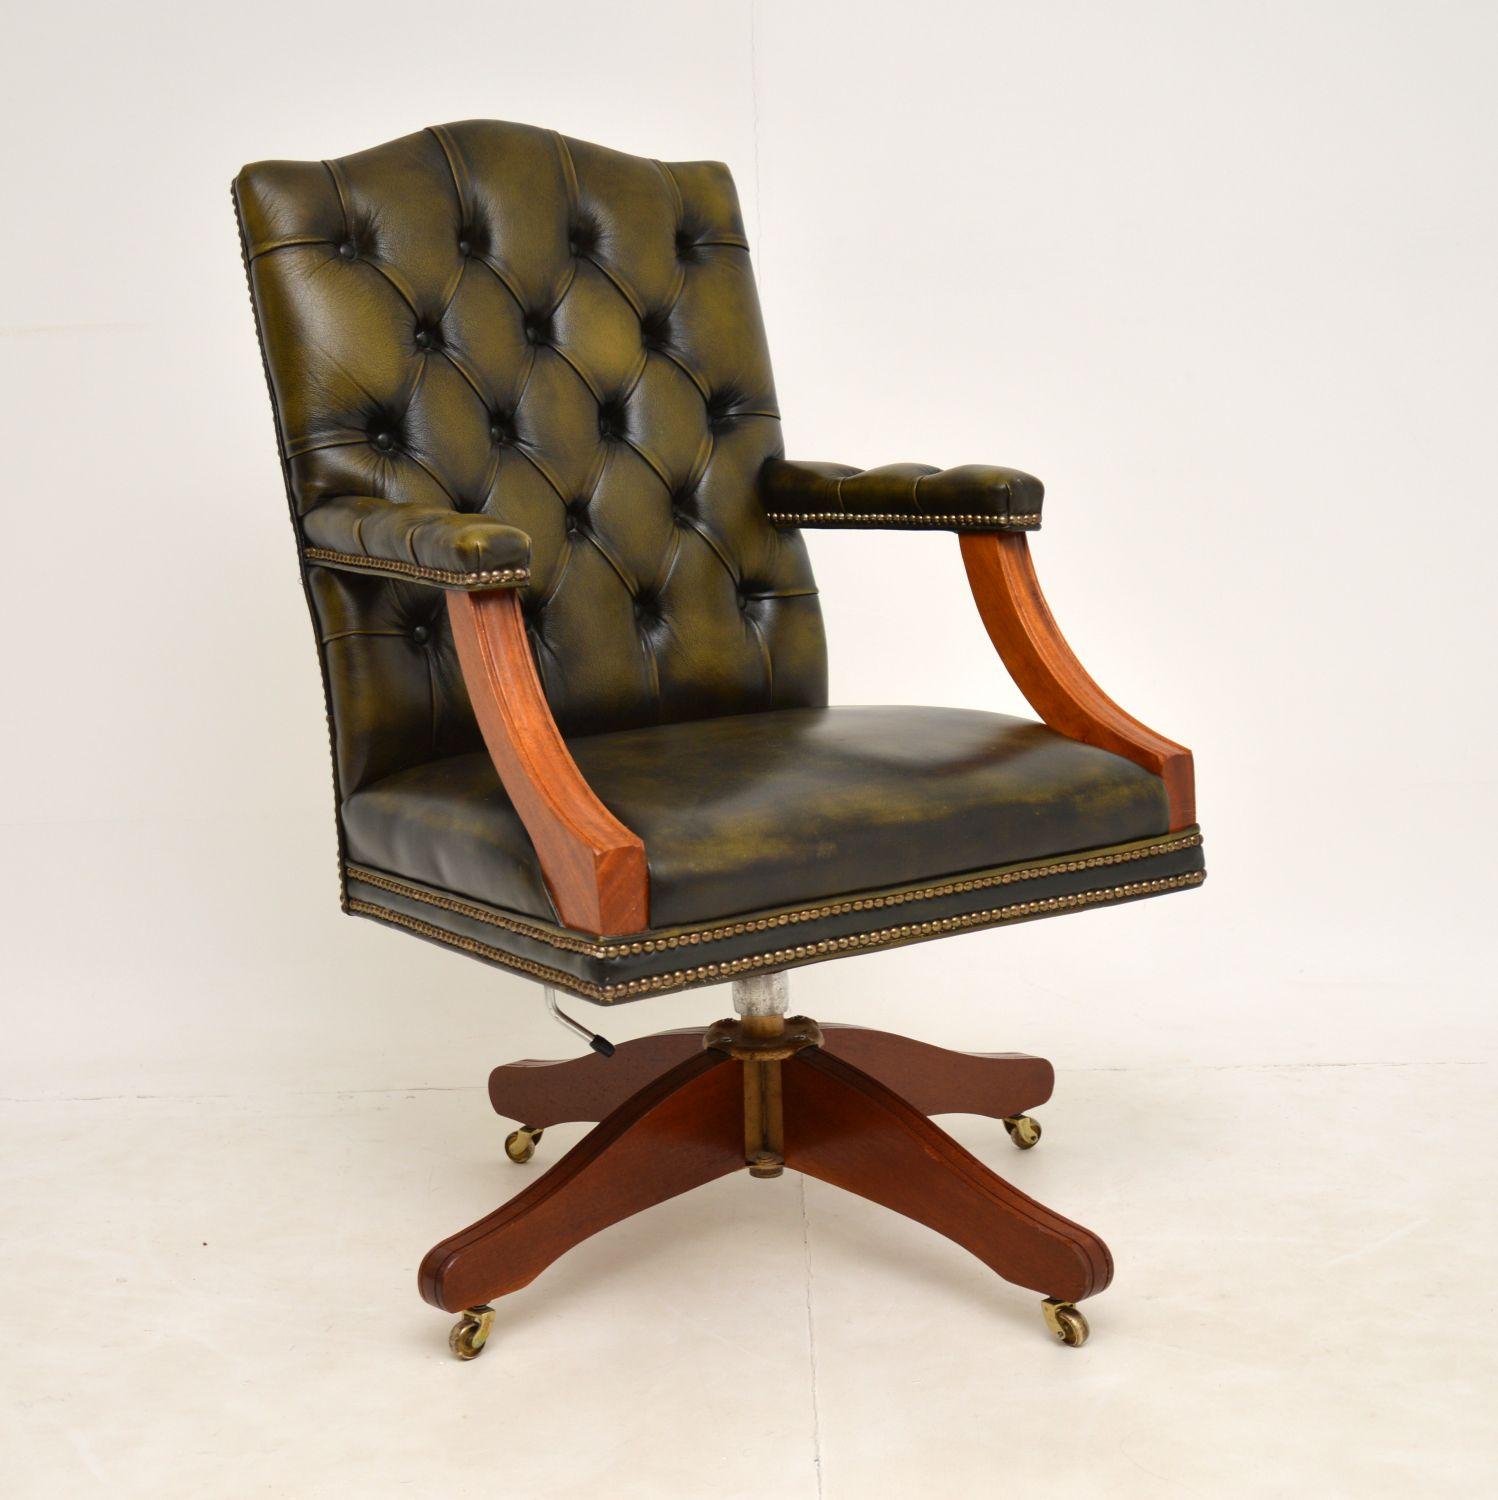 A fantastic leather swivel desk chair in the antique Georgian style. This dates from the mid twentieth century, around the 1960-70’s and is of very high quality.

It is extremely comfortable, it tilts, swivels and rolls on brass casters. The rise